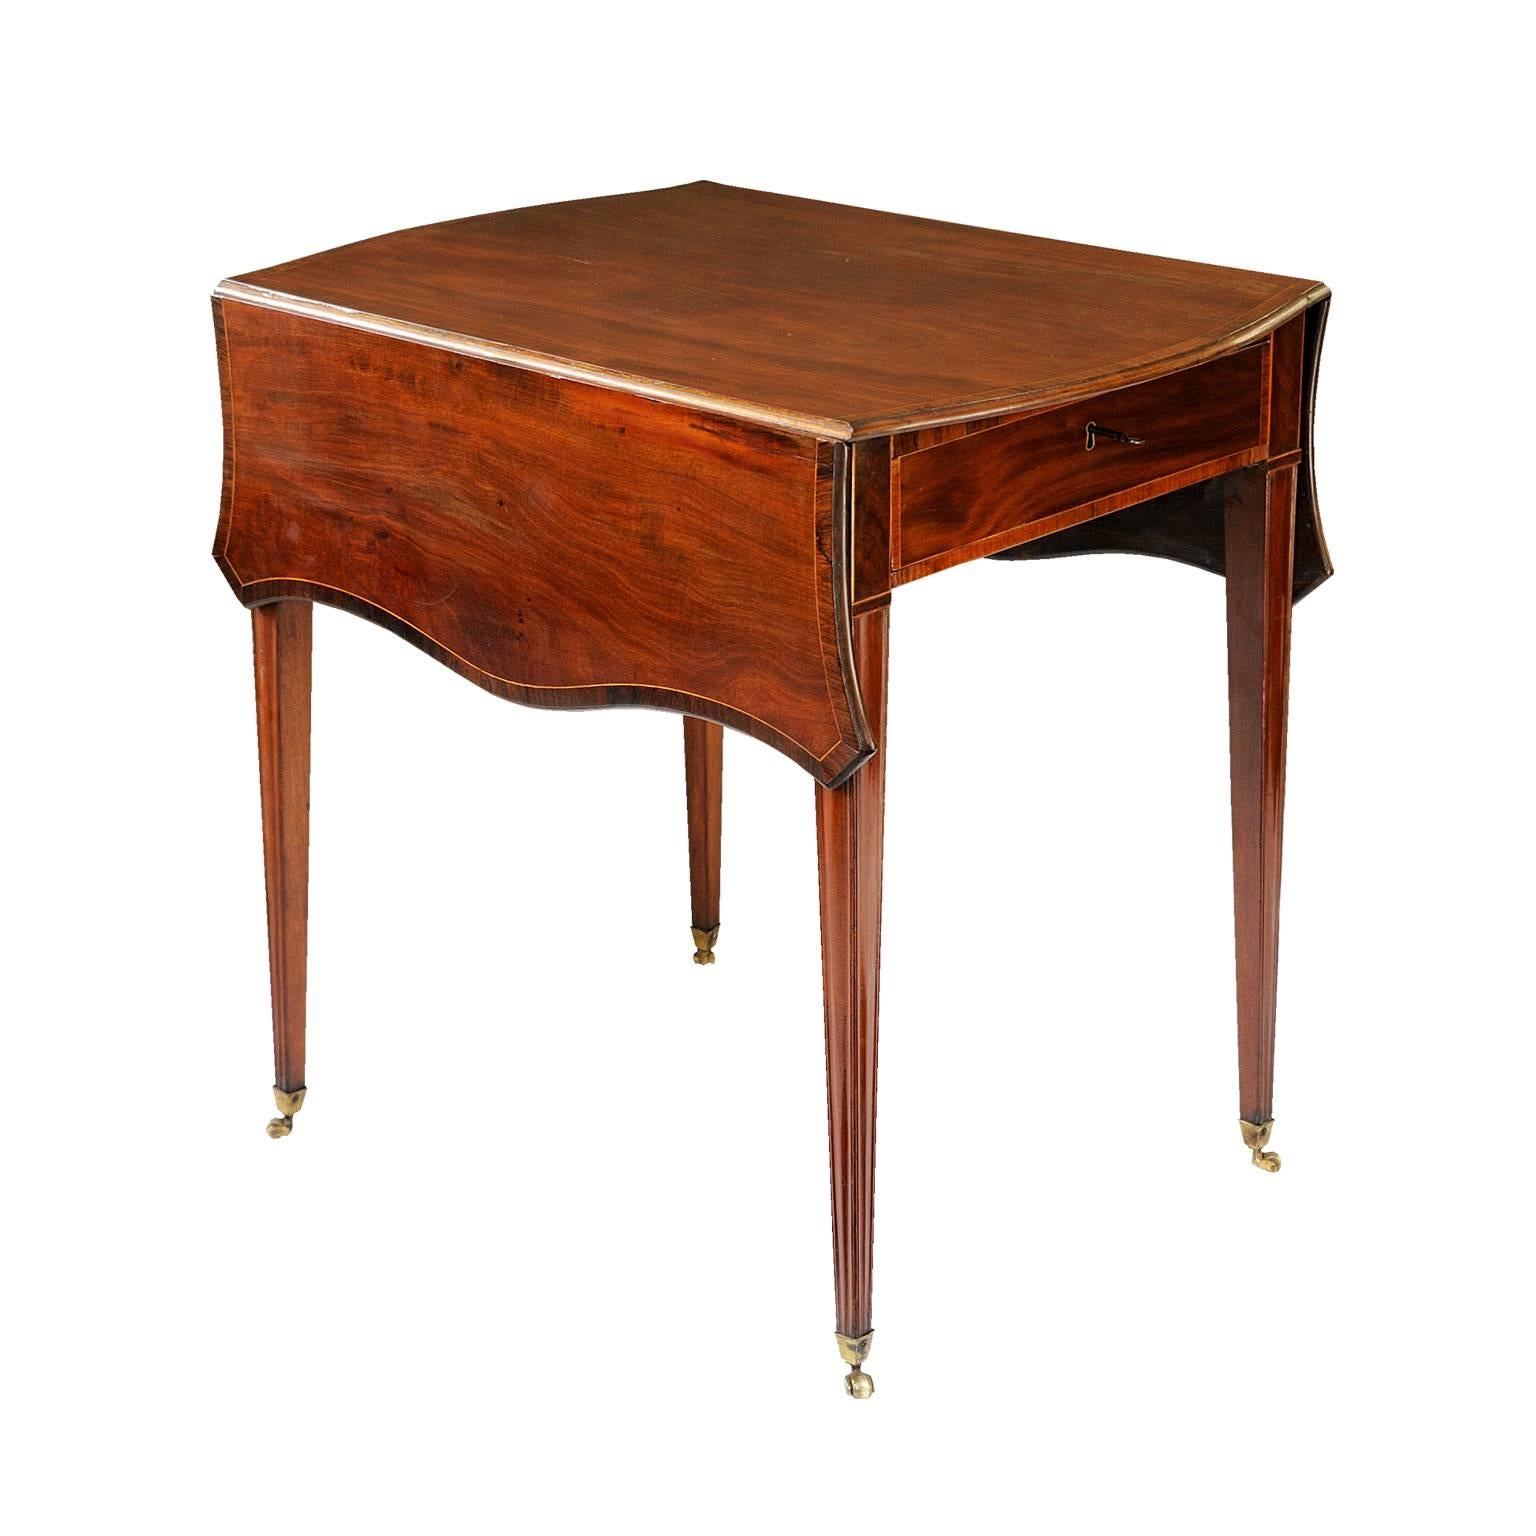 18th Century English George III period mahogany Pembroke table, with butterfly drop-leaves, standing on square tapered legs and brass cup castors. Single drawer with original lock and key, stringing and cross-band decoration (c.1780).